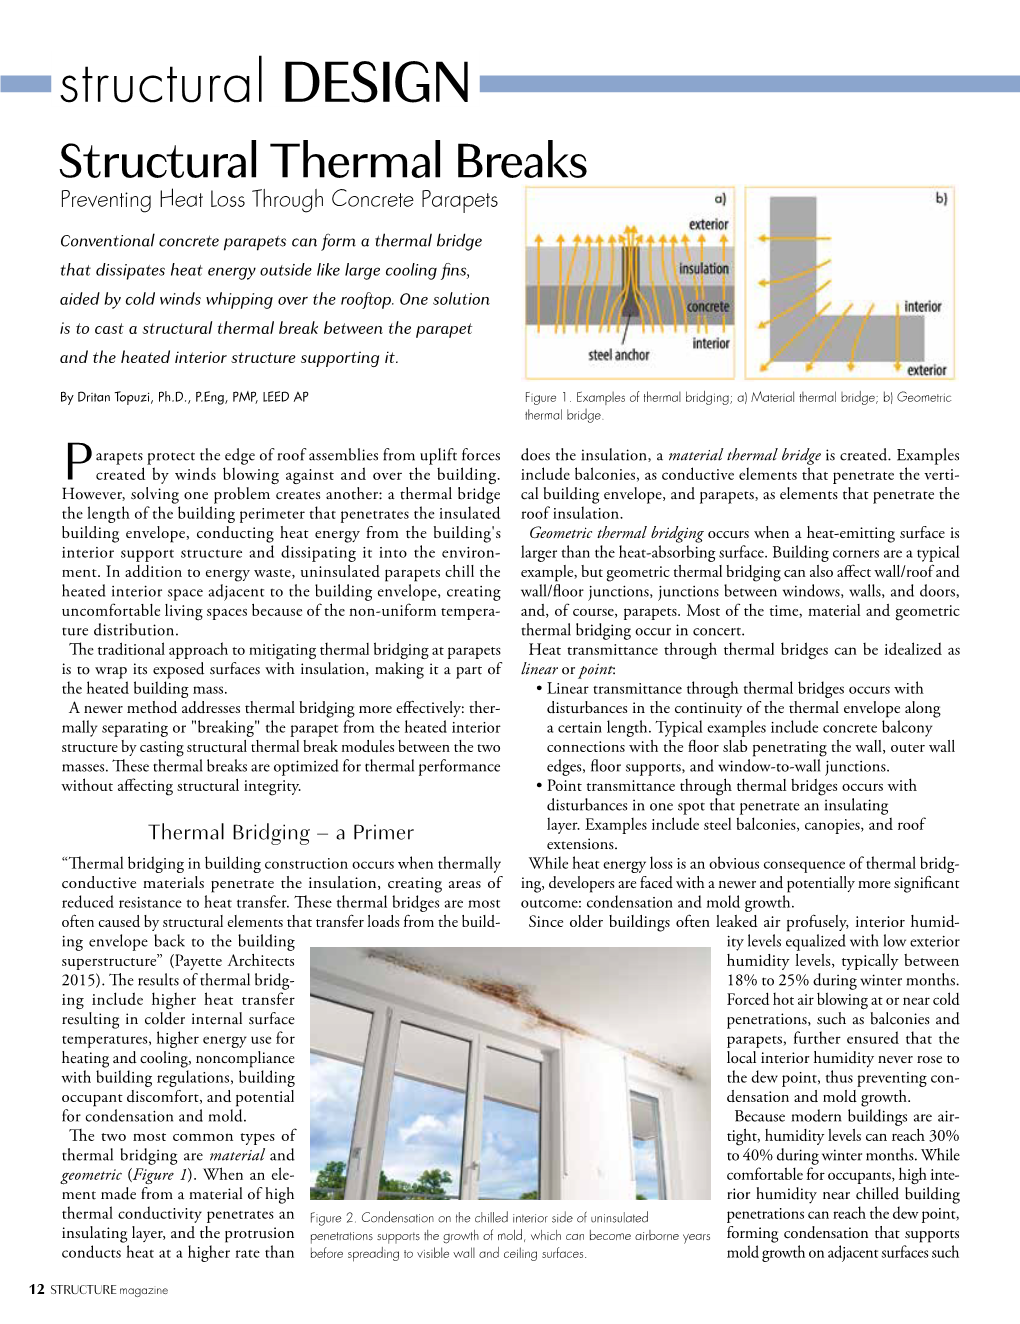 Structural DESIGN Structural Thermal Breaks Preventing Heat Loss Through Concrete Parapets